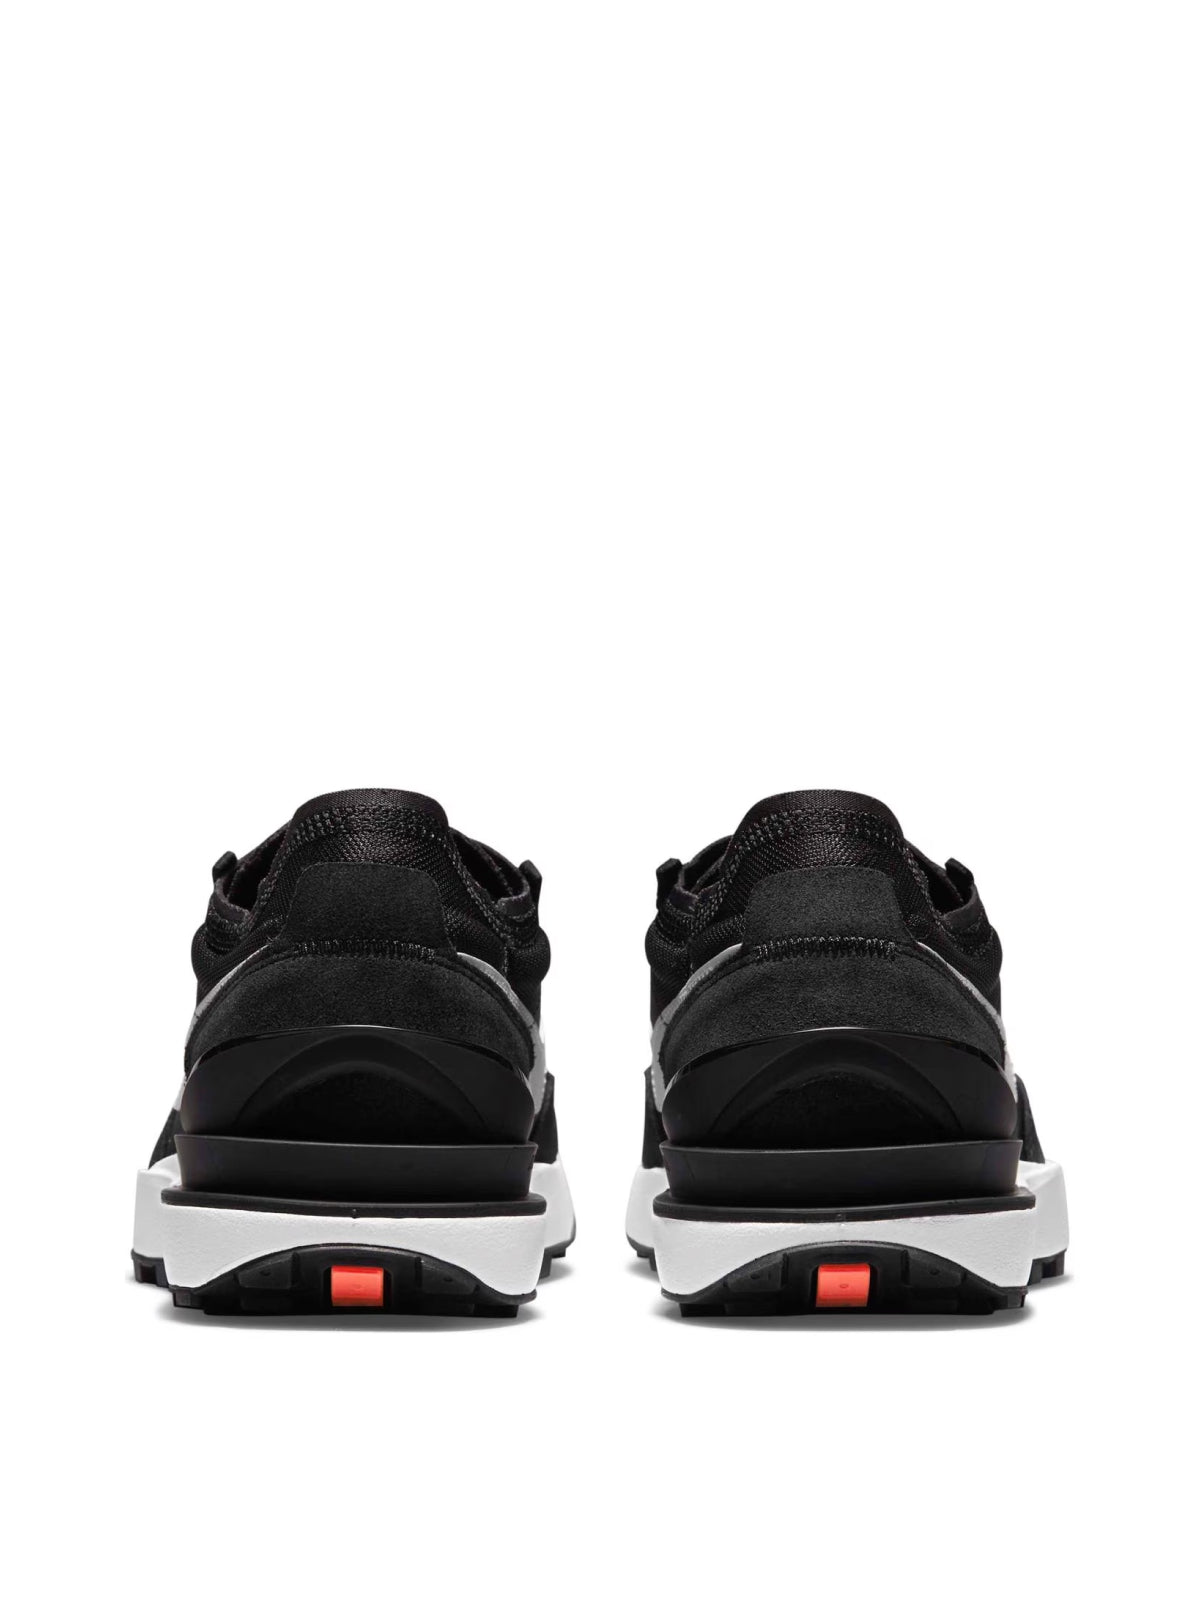 Nike-OUTLET-SALE-Waffle One Sneakers-ARCHIVIST